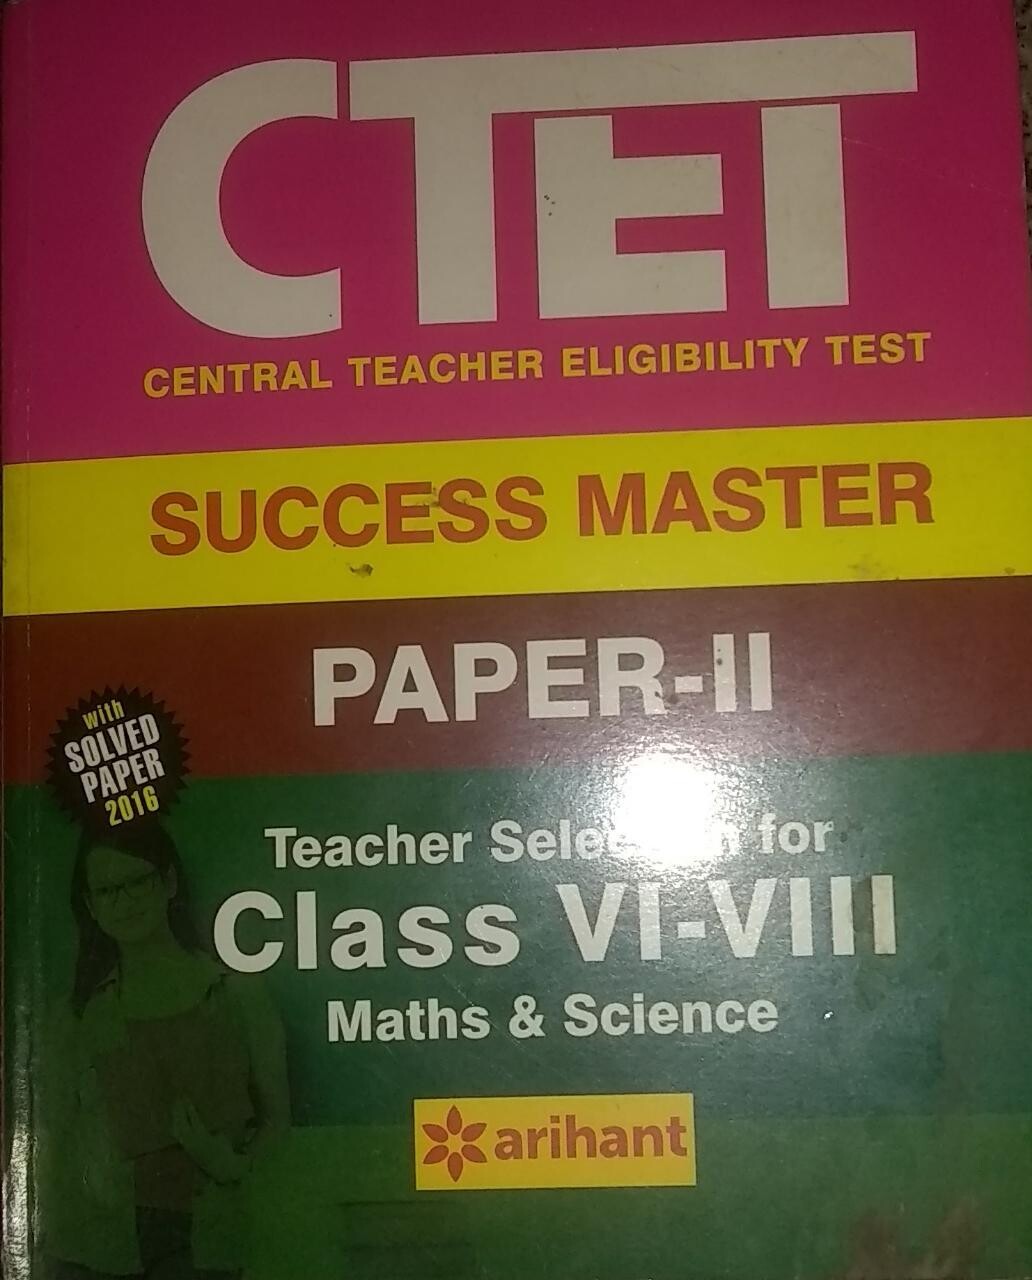 CTET Success Master Paper-2 techer selection for class 6-7th Maths &amp; Science by Arihant